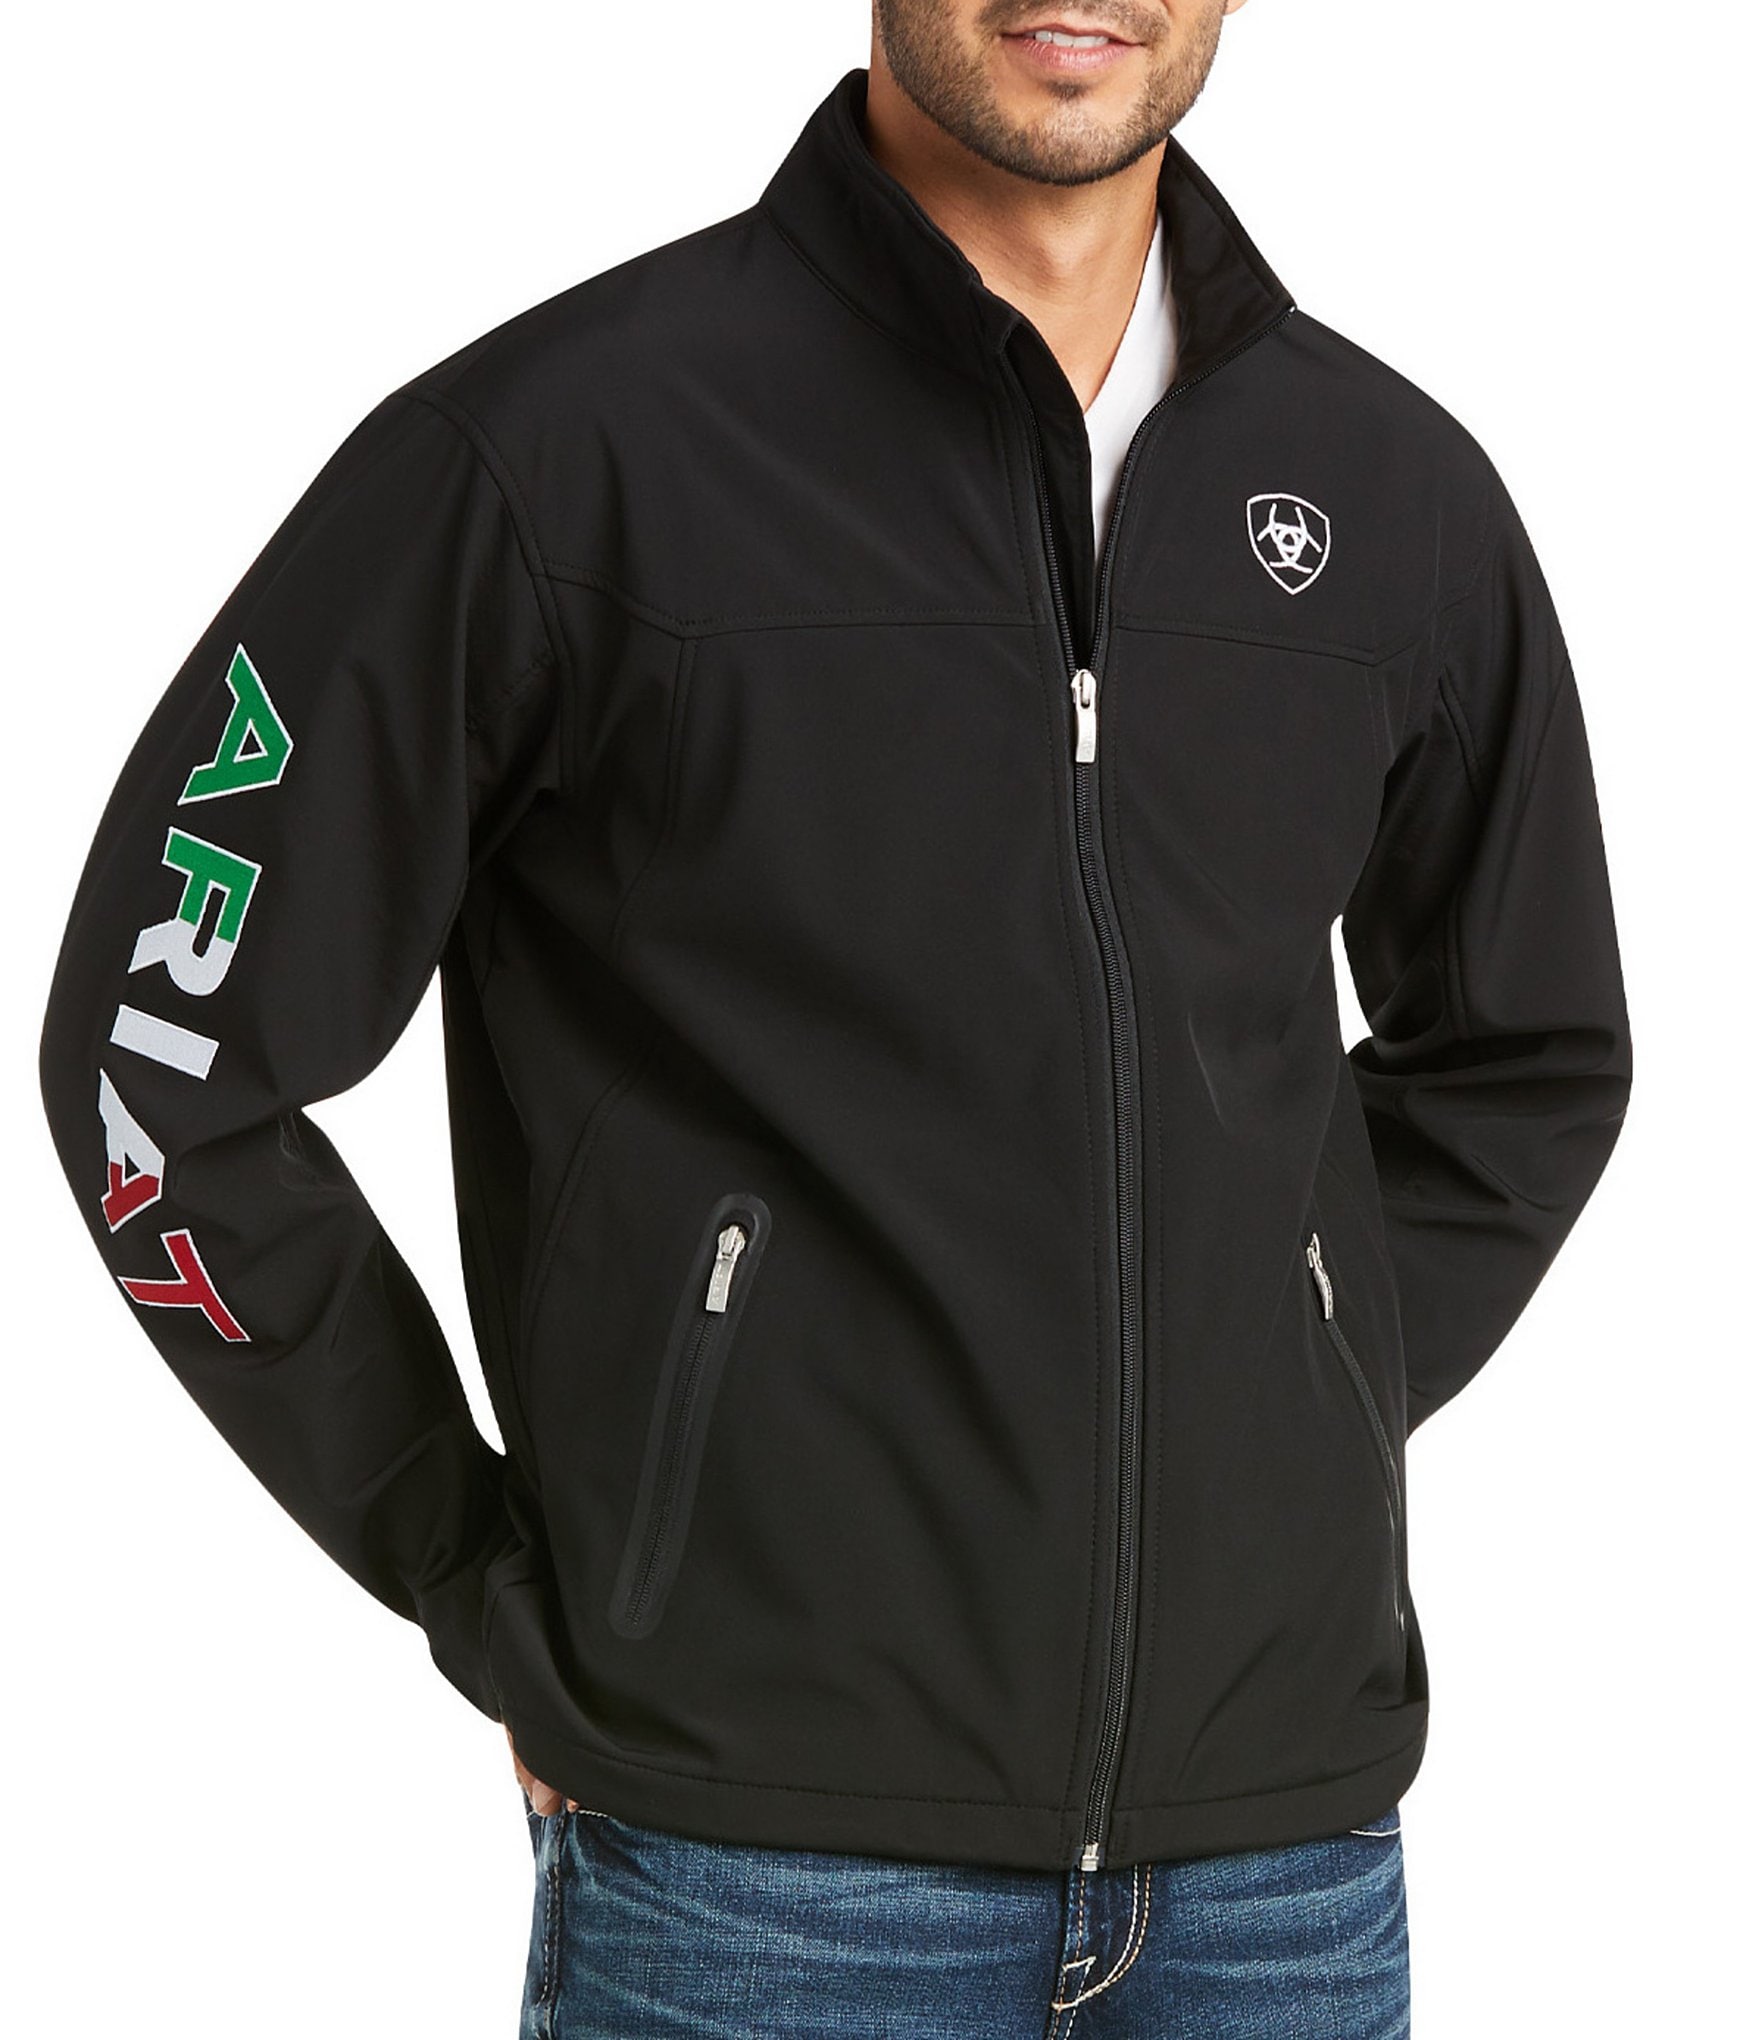 https://dimg.dillards.com/is/image/DillardsZoom/zoom/ariat-team-softshell-mexico-water-resistant-full-zip-jacket/00000000_zi_3768d37d-64bd-420e-b849-d7b998a9ba2f.jpg